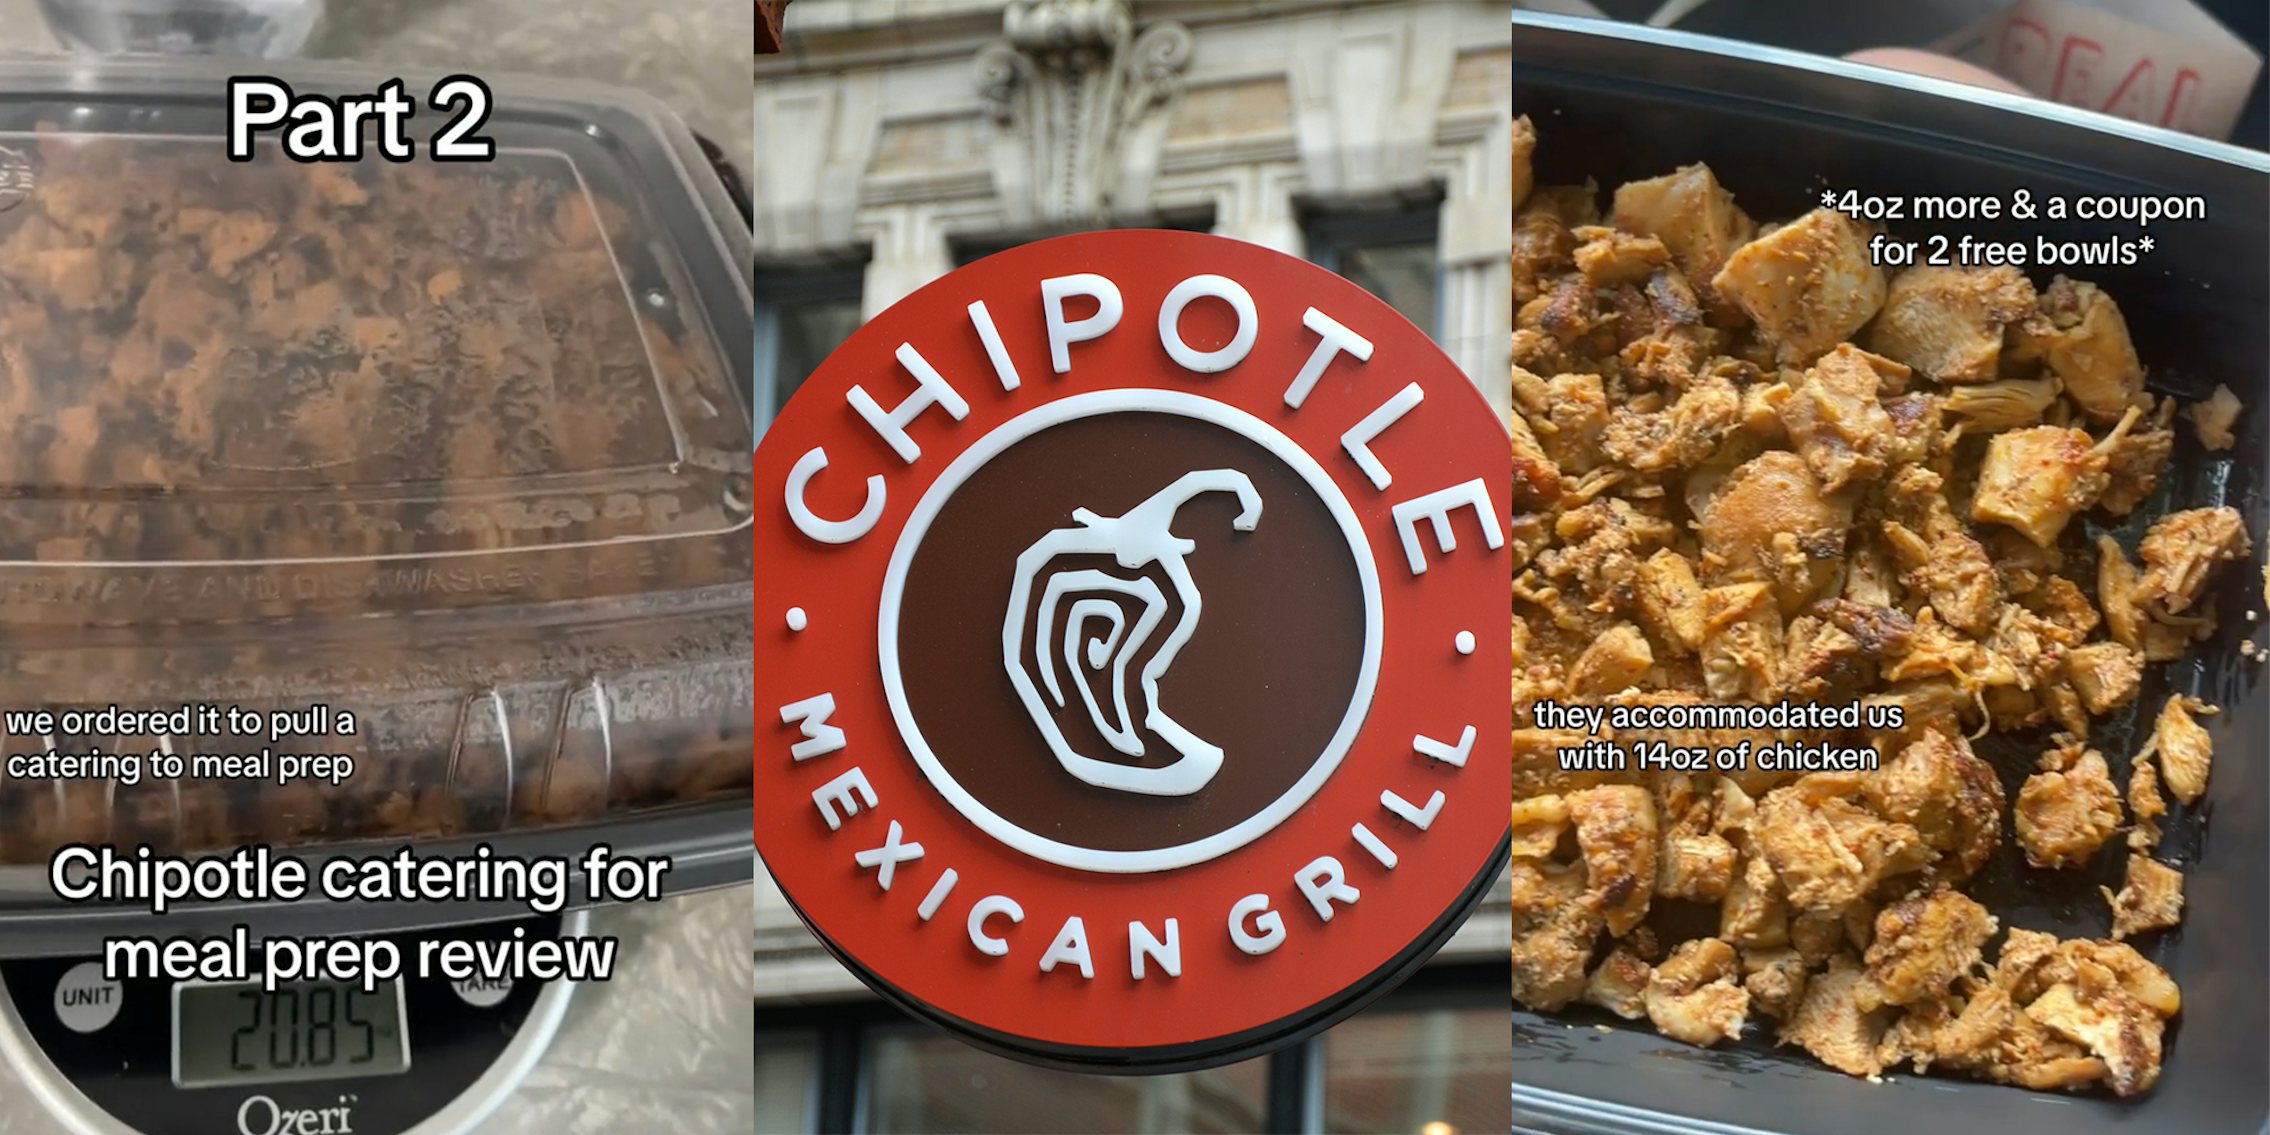 Chipotle customer complains about getting skimped on 10 ounces of chicken